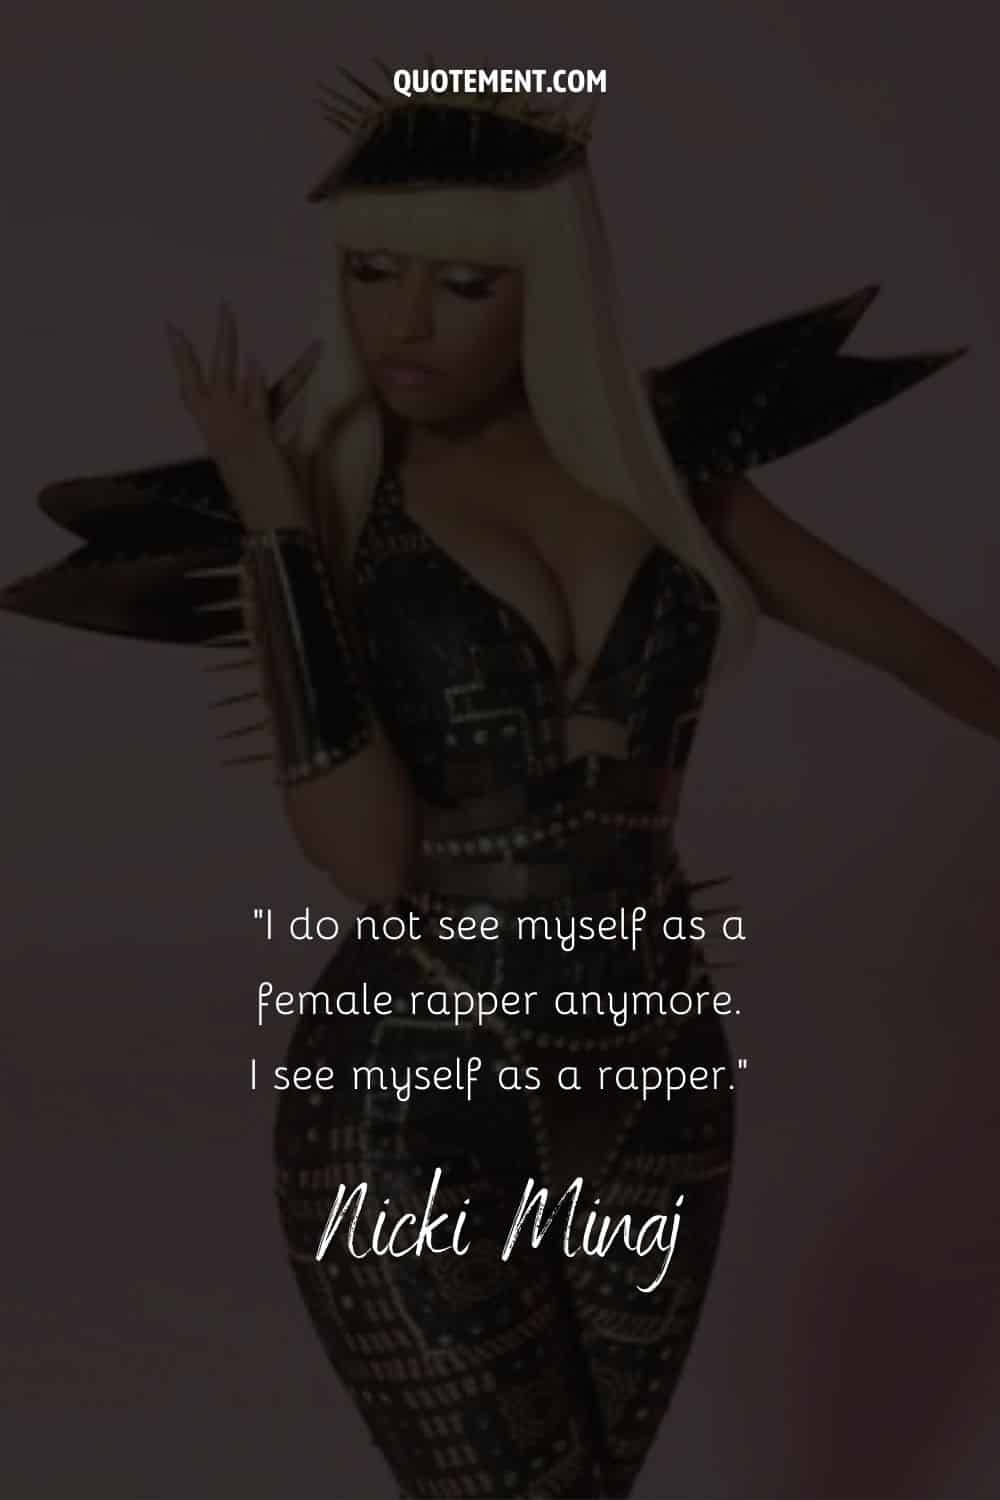 Inspirational quote by Nicki Minaj on how she sees herself, and her photo in the background